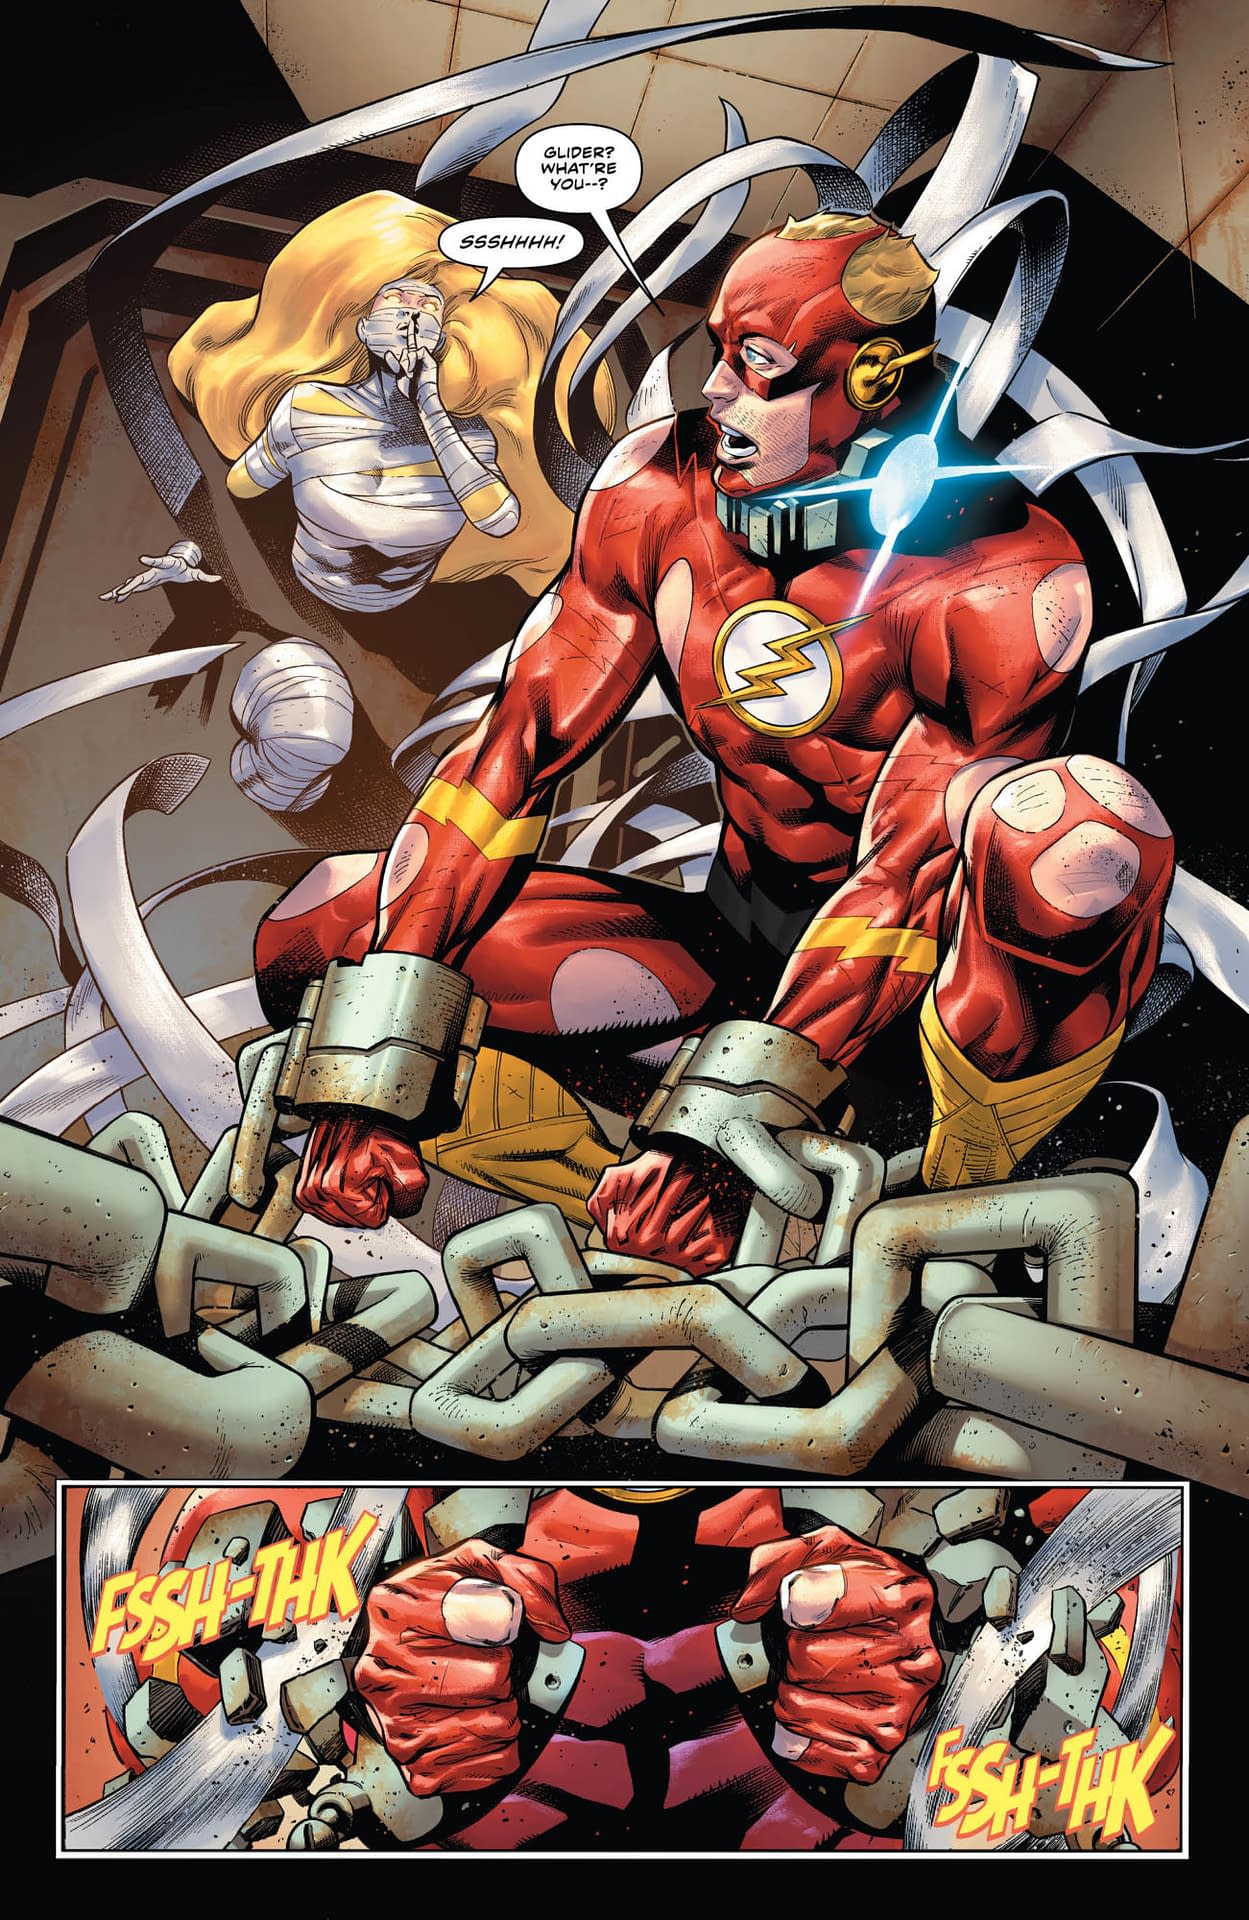 Who Helps Barry Break Out of Prison in The Flash #83 [Preview]